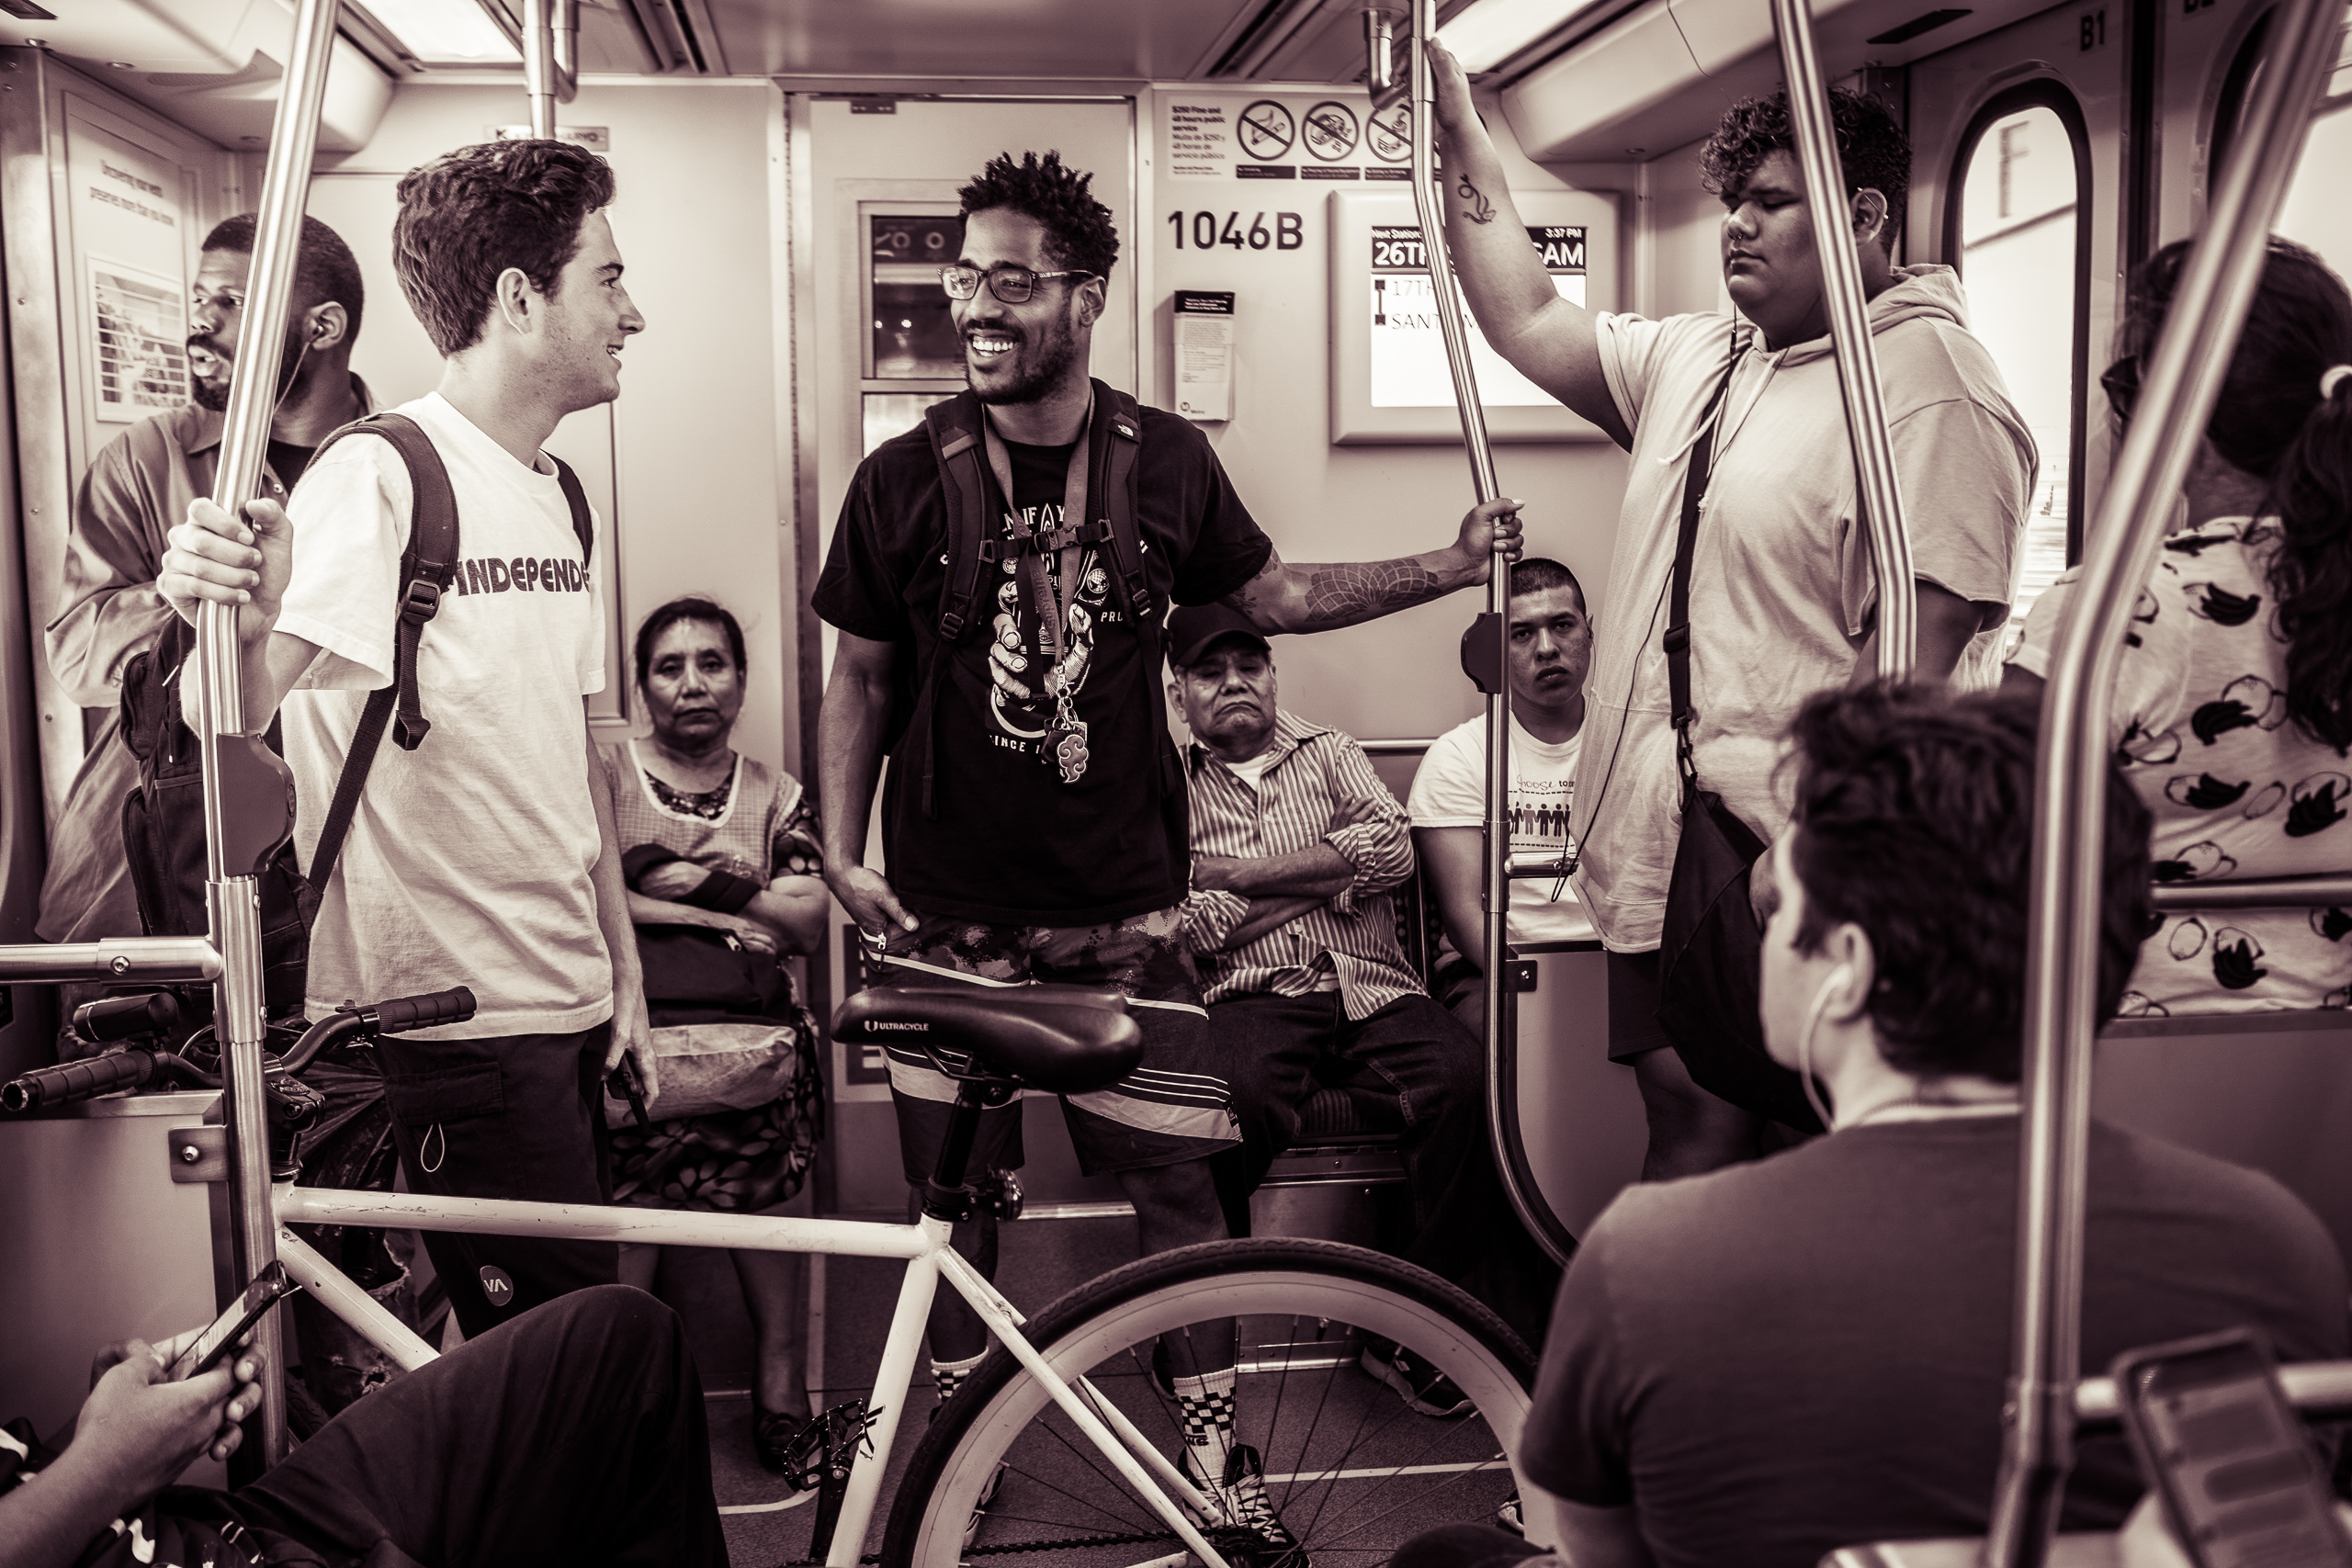 two guys with bicycles talk on a Metro train, one wears a t-shirt that reads "Independent"